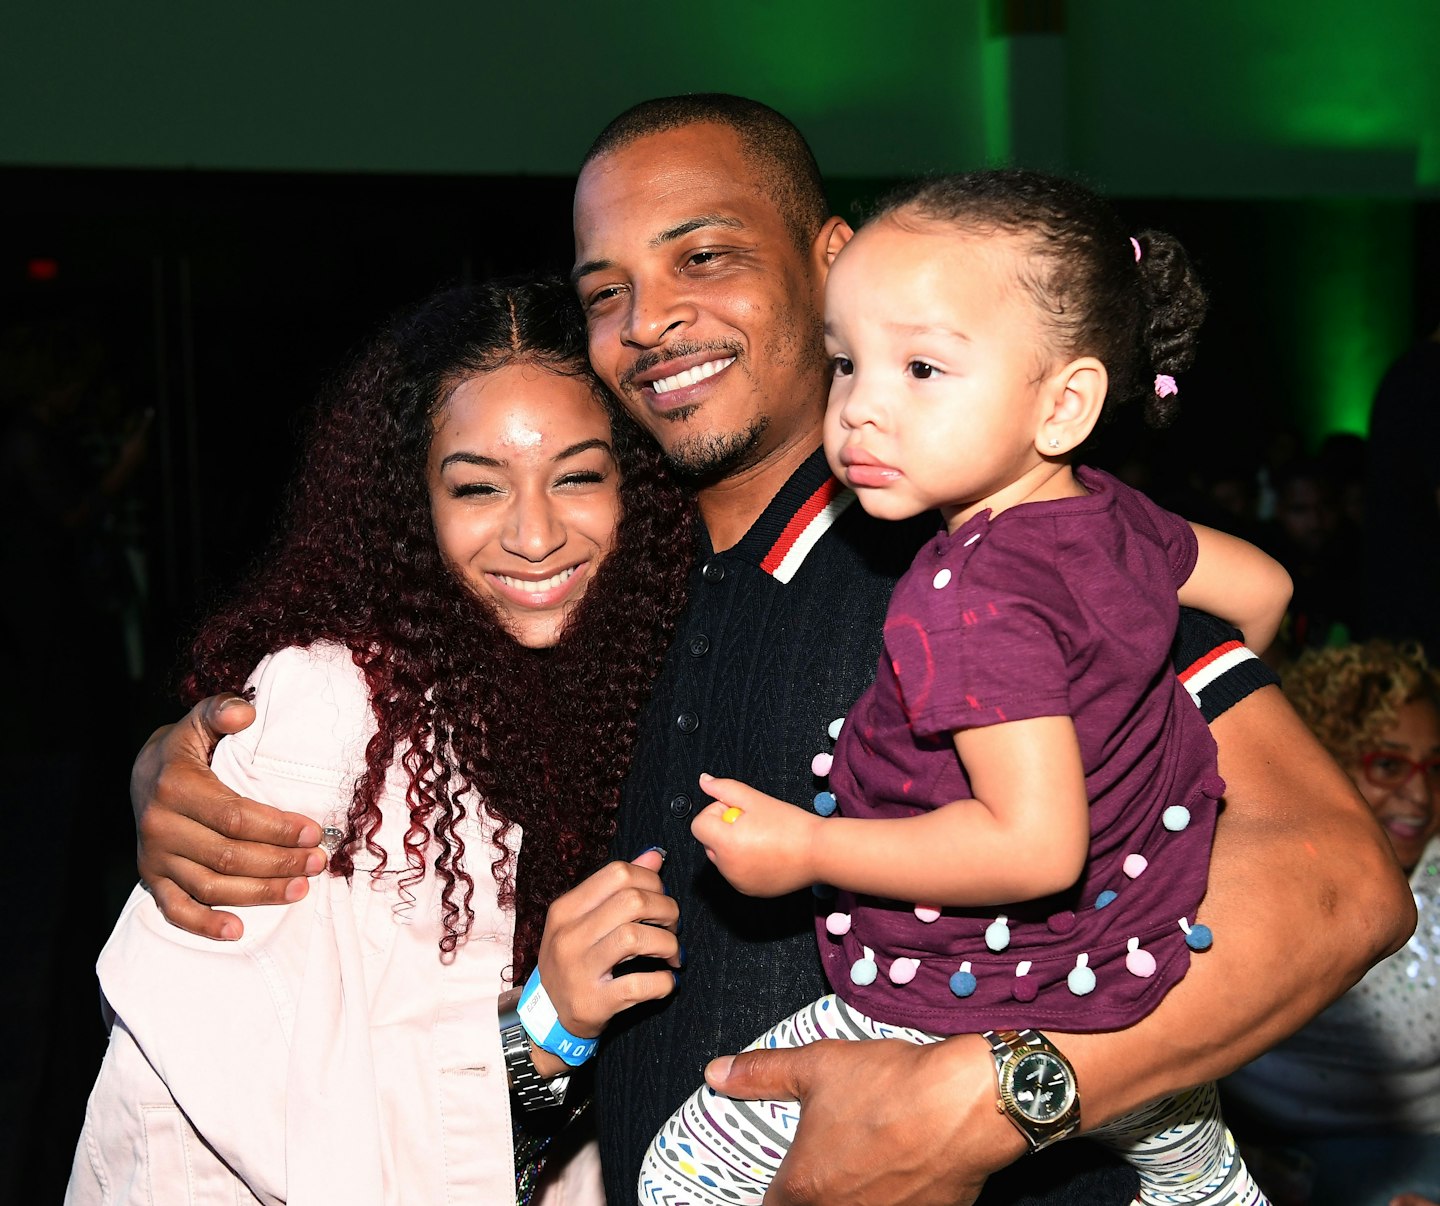 T.I. Takes Daughter To Gynecologist To 'Check Her Hymen' Is Intact